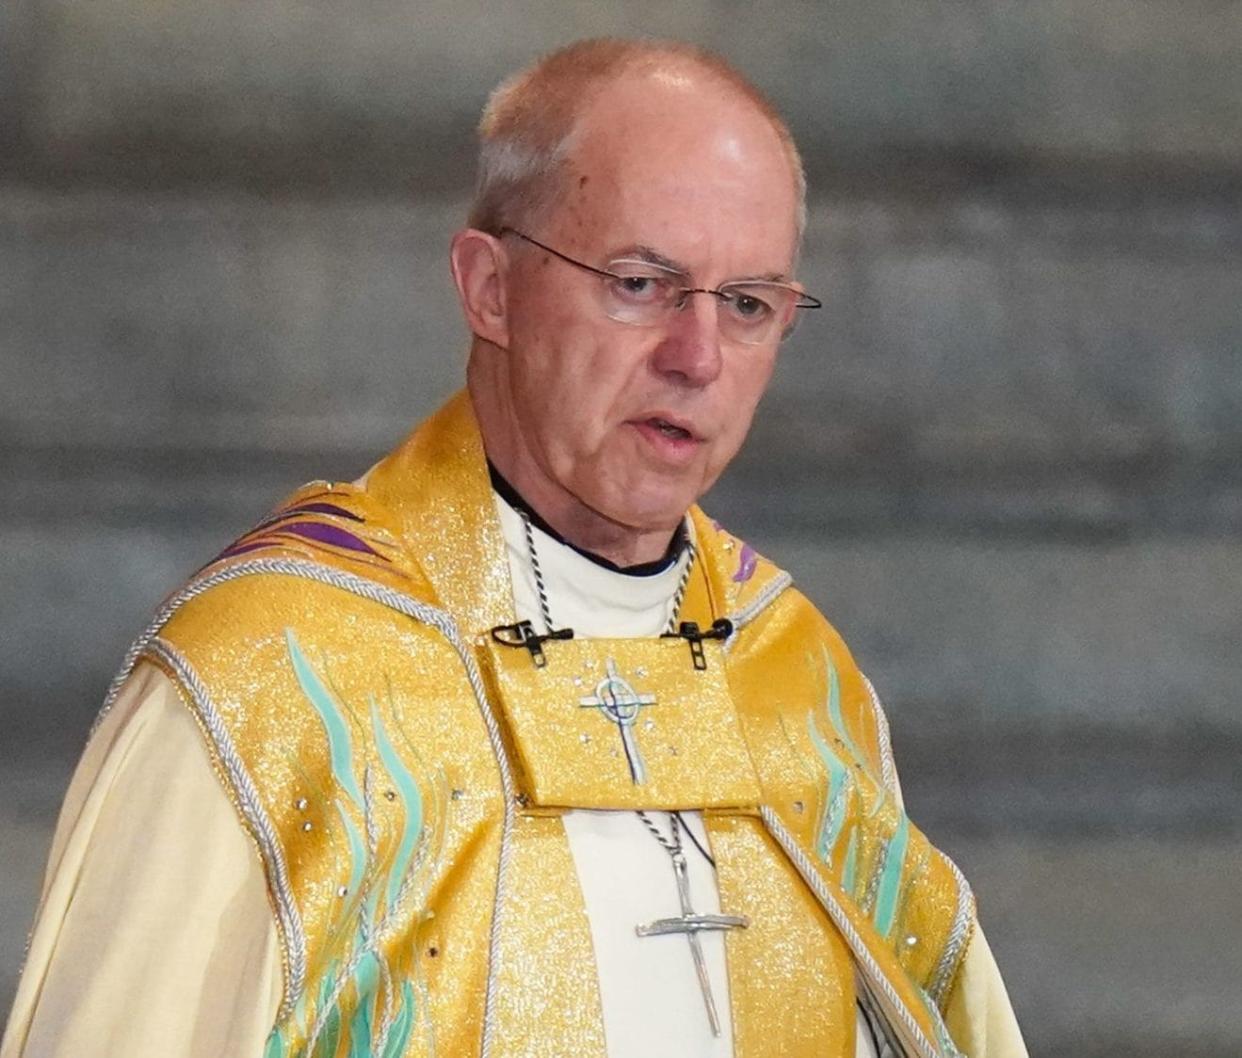 Justin Welby is also a graduate of the Alpha programme